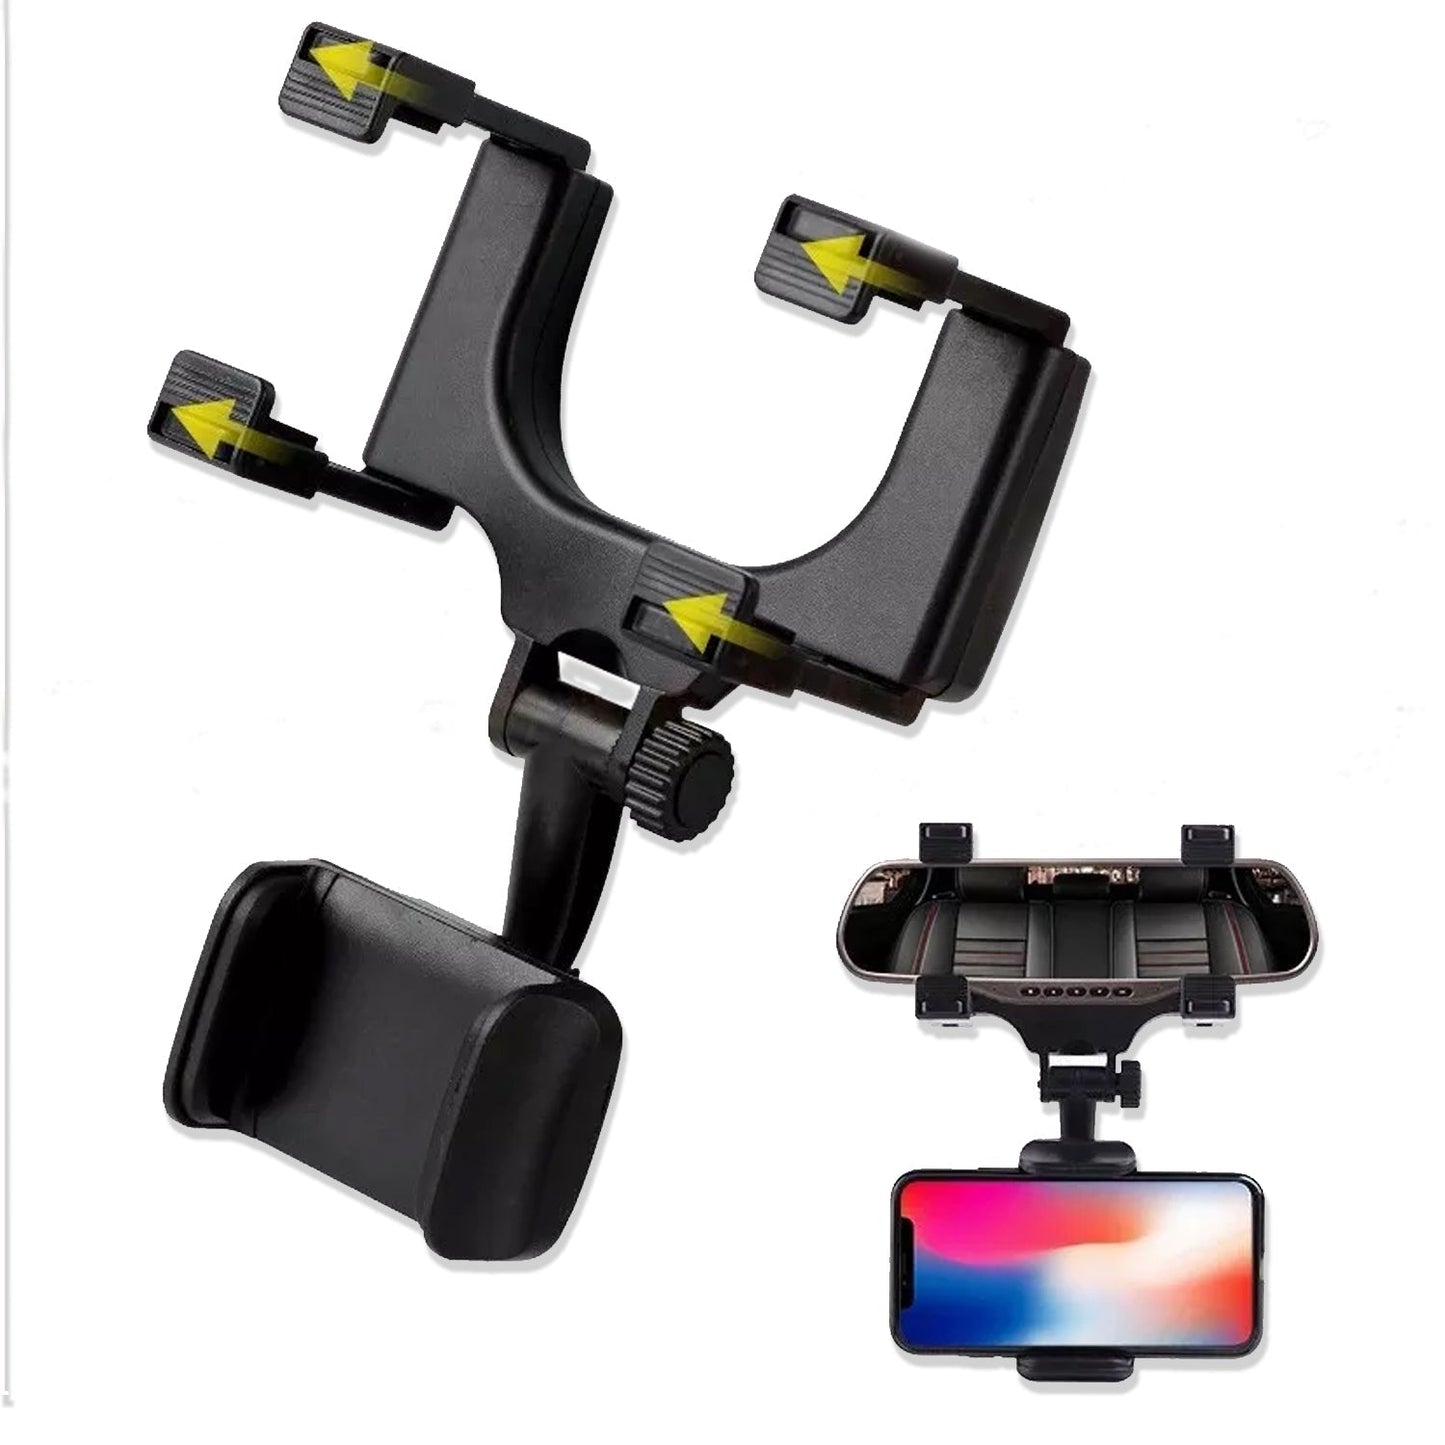 6279 Rear View Mobile Holder Universal Vehicle Rear View Mirror Mobile phone Mount Stand